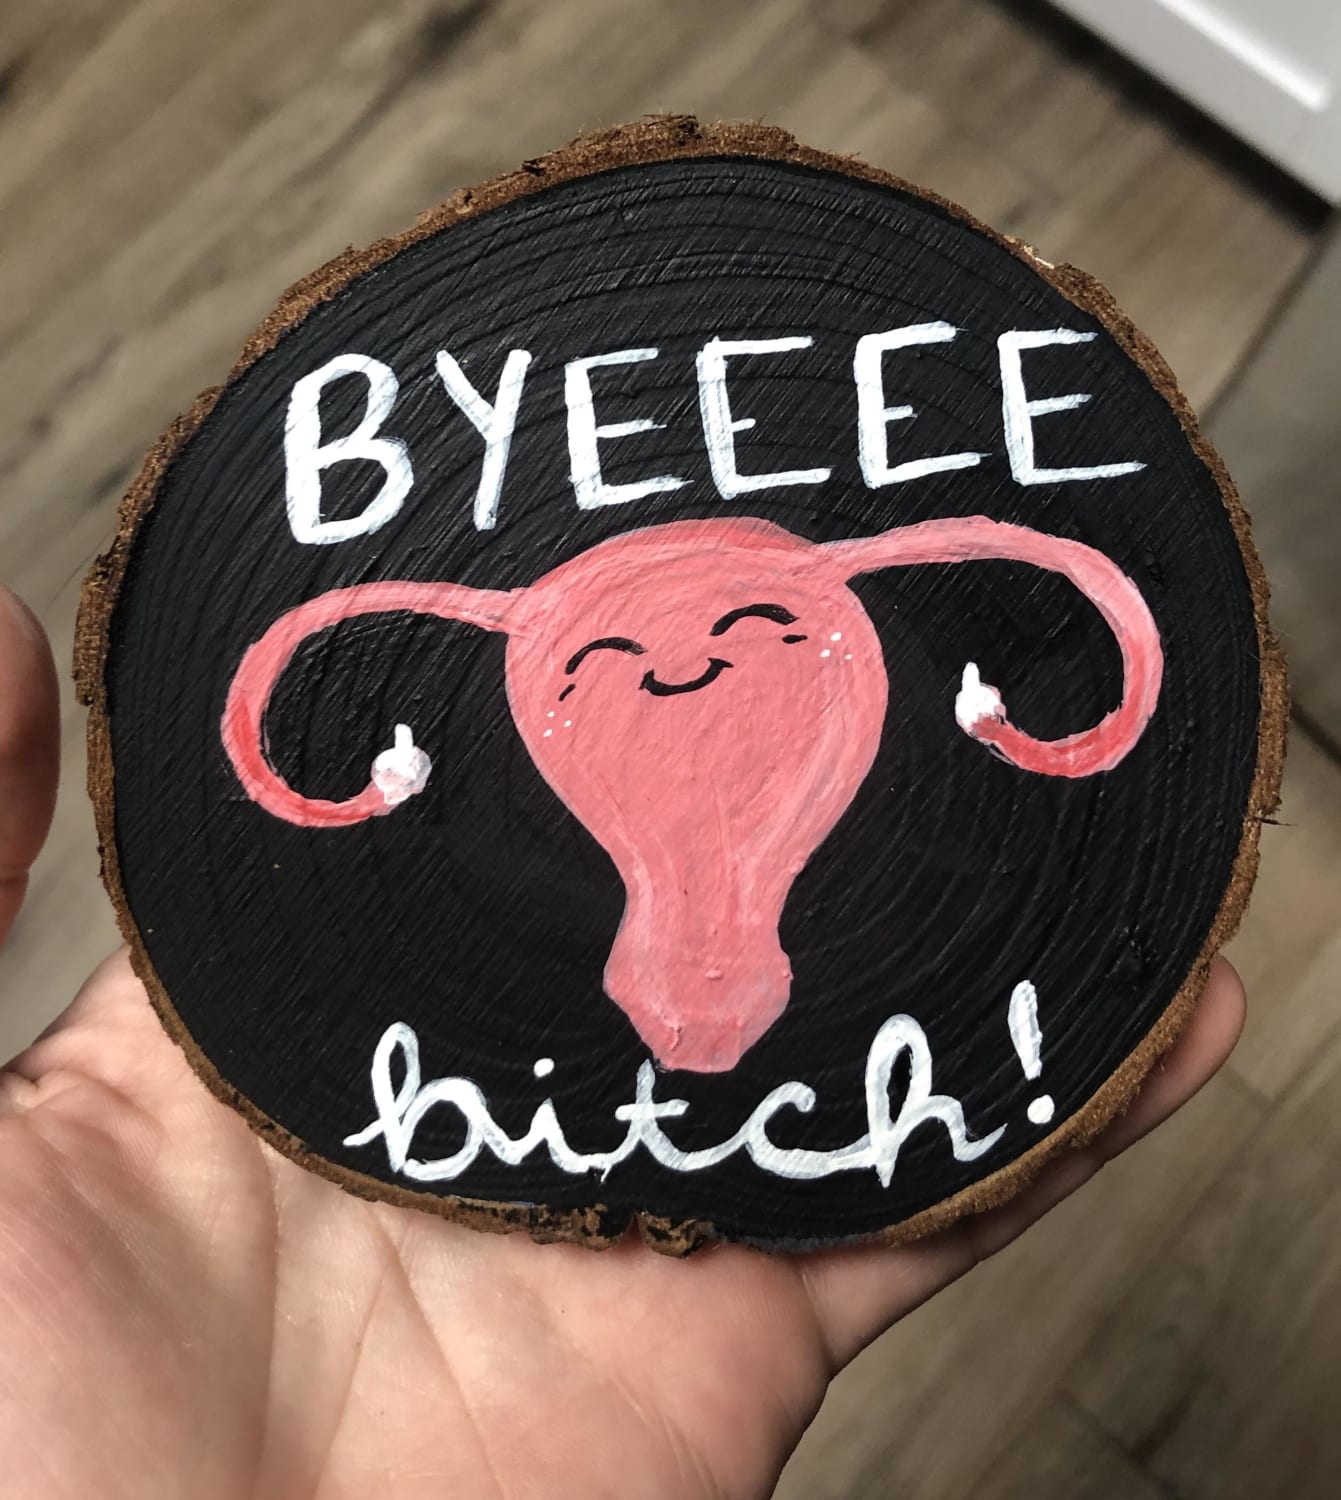 My little hysterectomy painting was removed over in /art, so I thought it might be appreciated over here instead. Happy Tuesday from this sassy uterus!